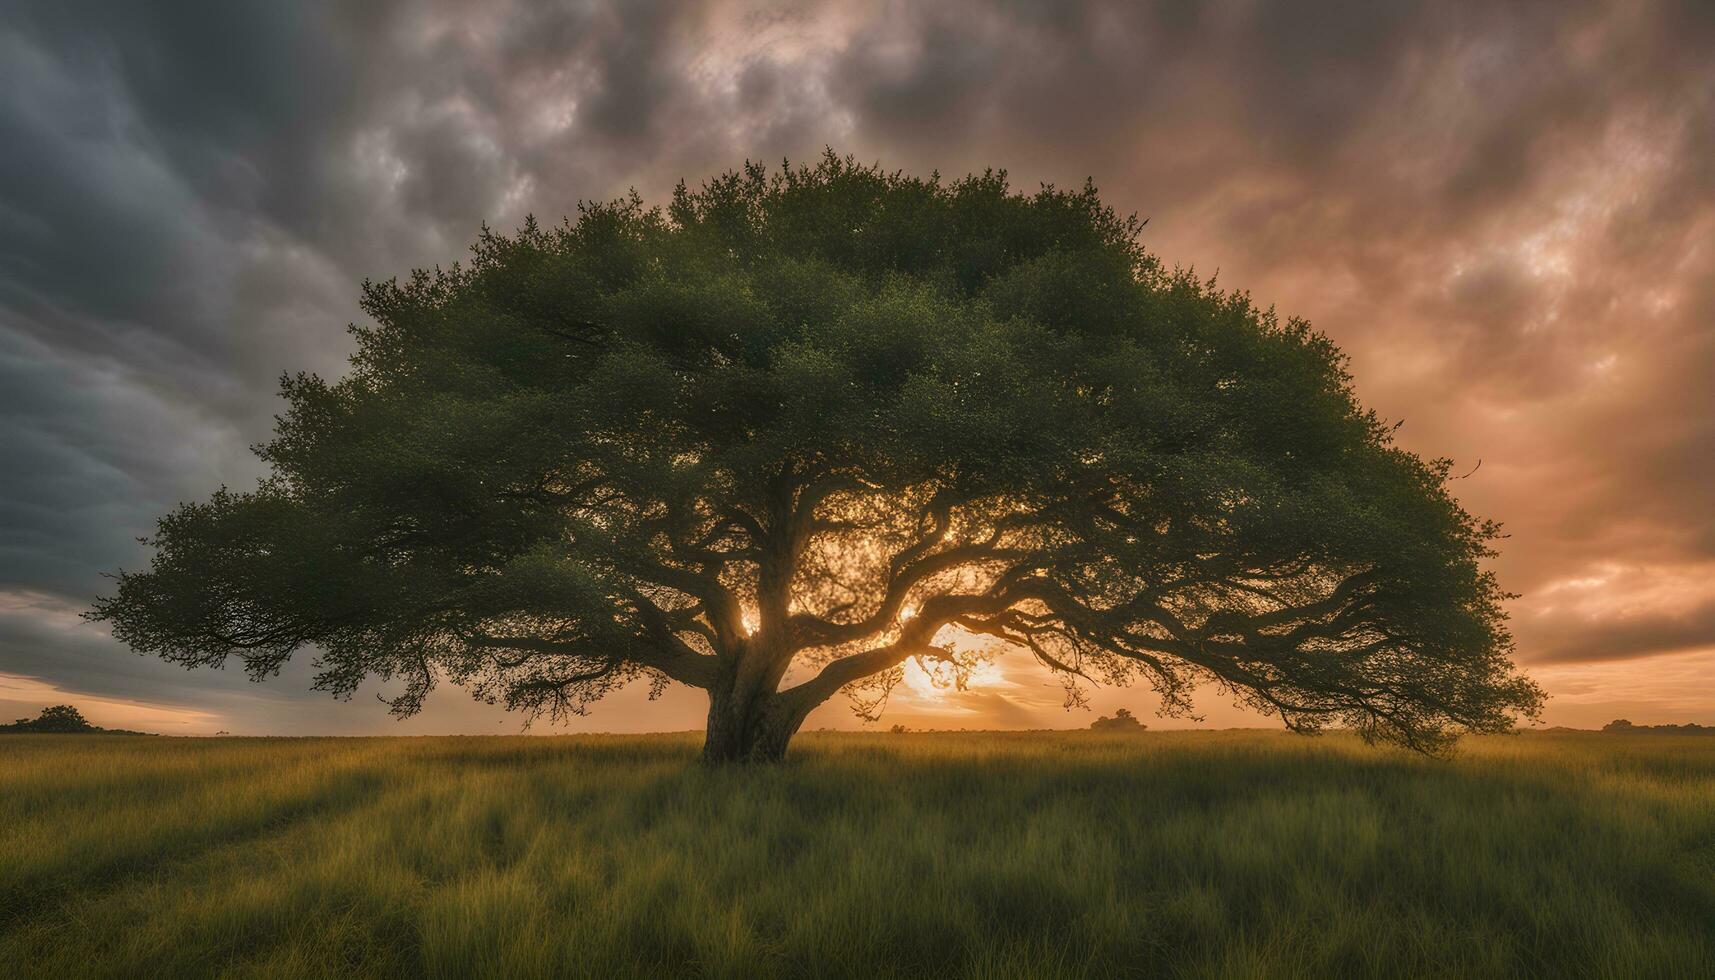 AI generated a tree stands in a field with a dramatic sunset photo